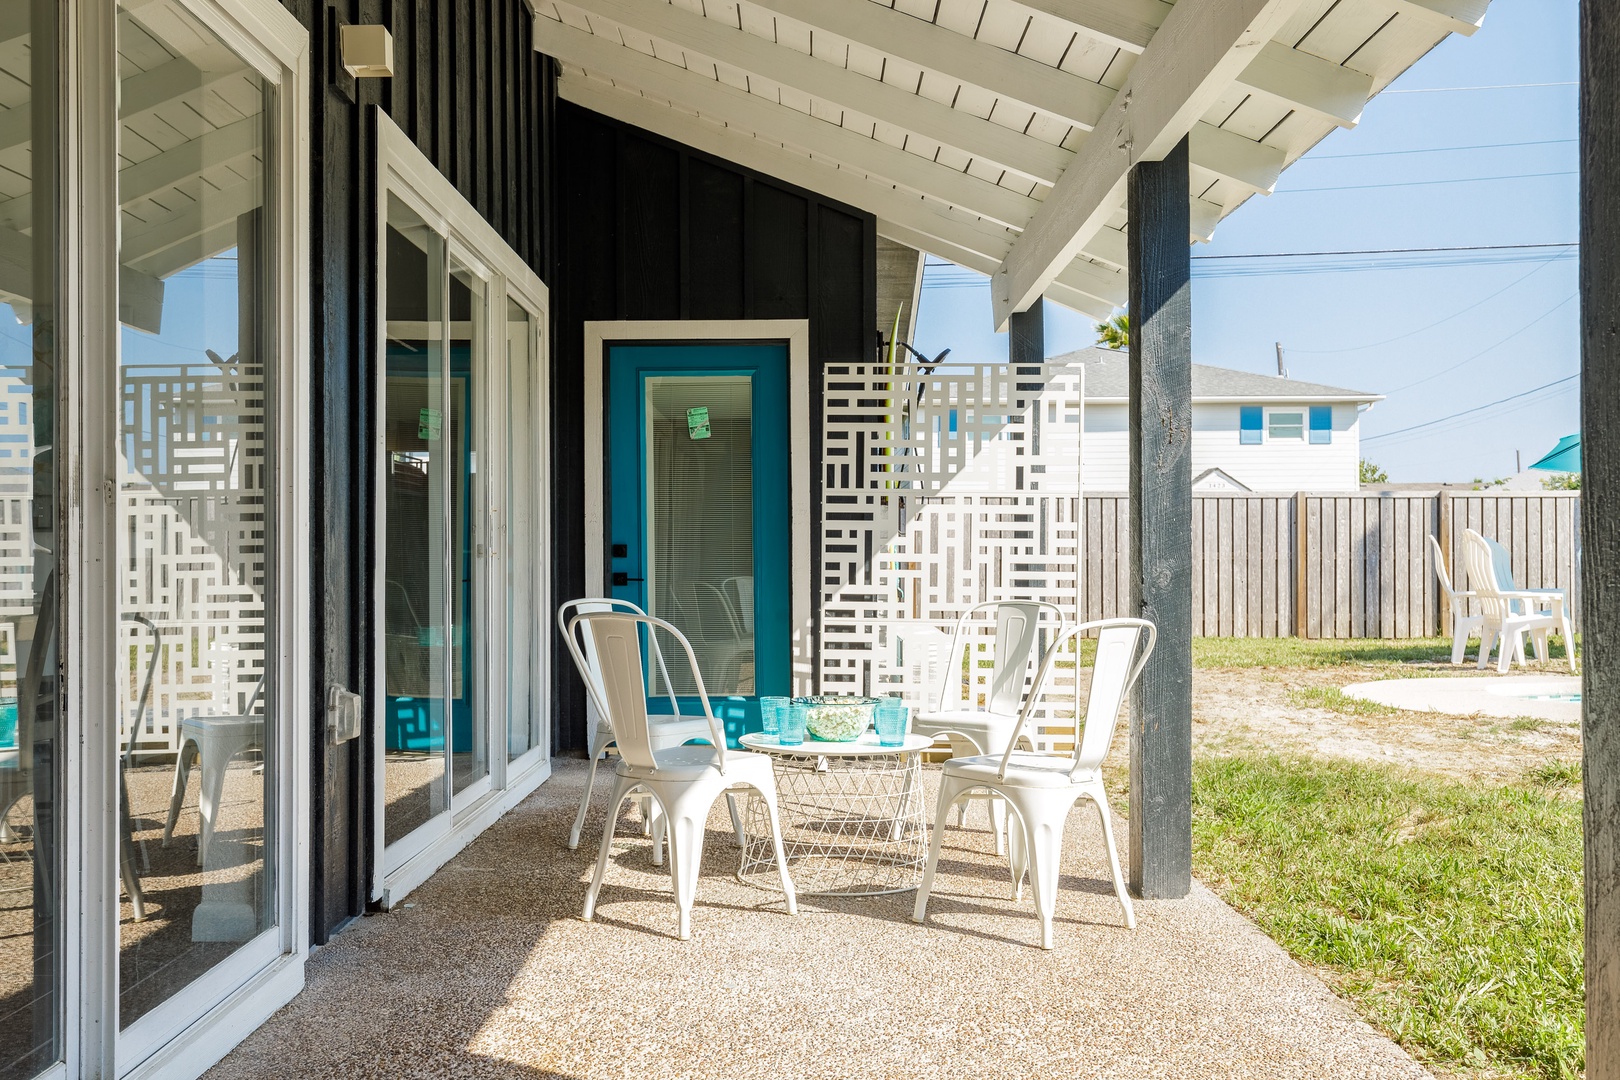 Spend time together making memories on the spacious back patio